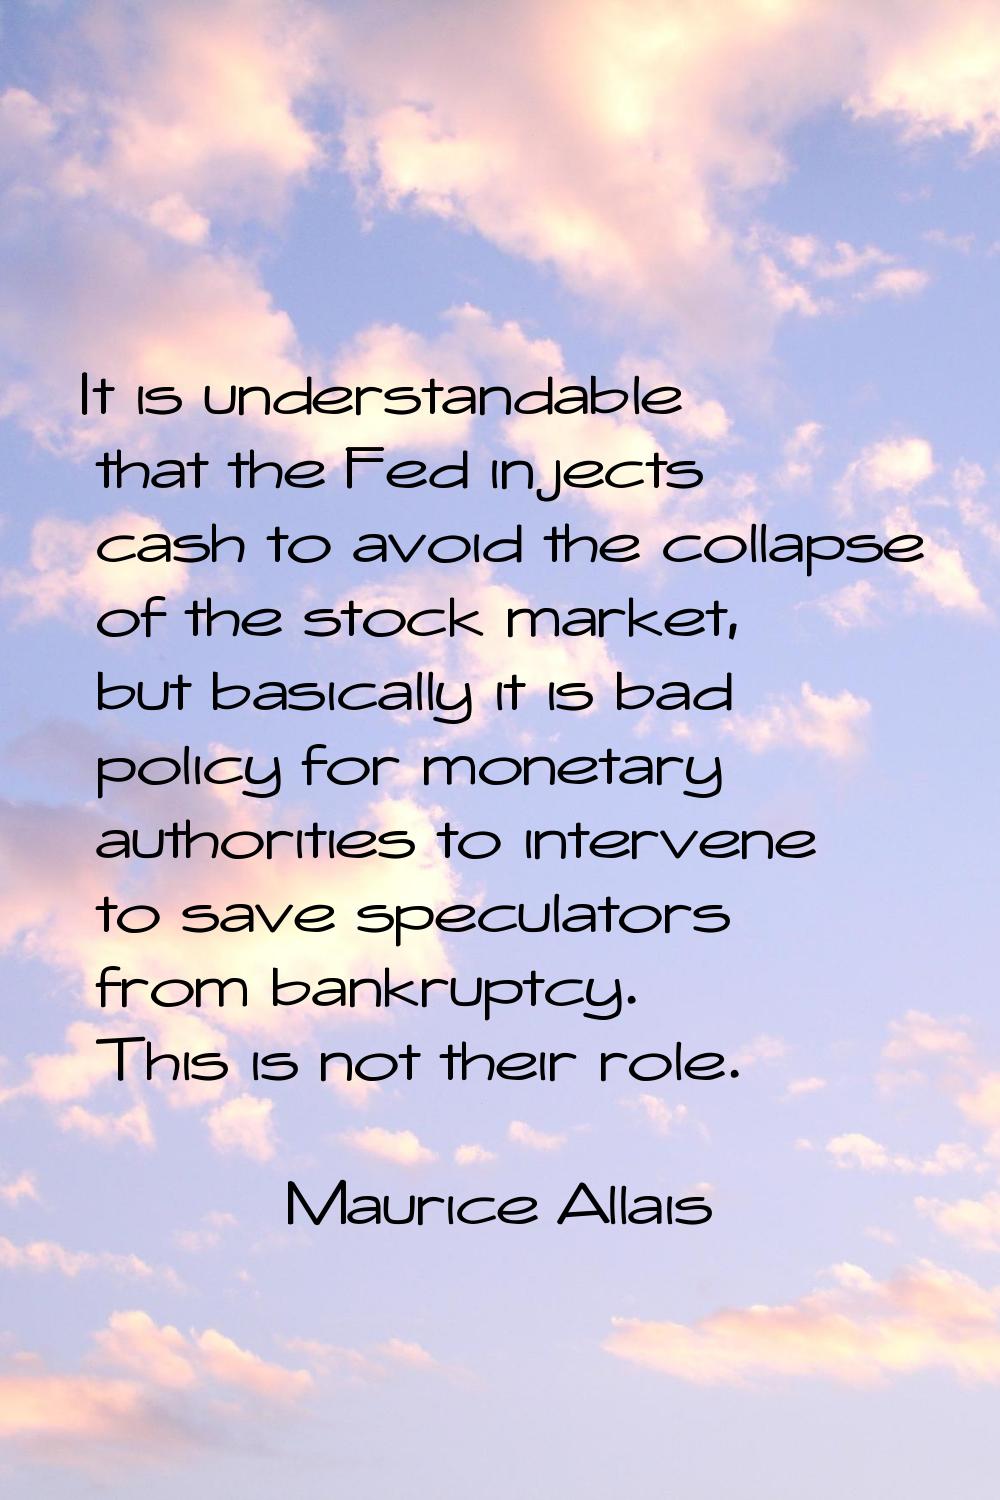 It is understandable that the Fed injects cash to avoid the collapse of the stock market, but basic